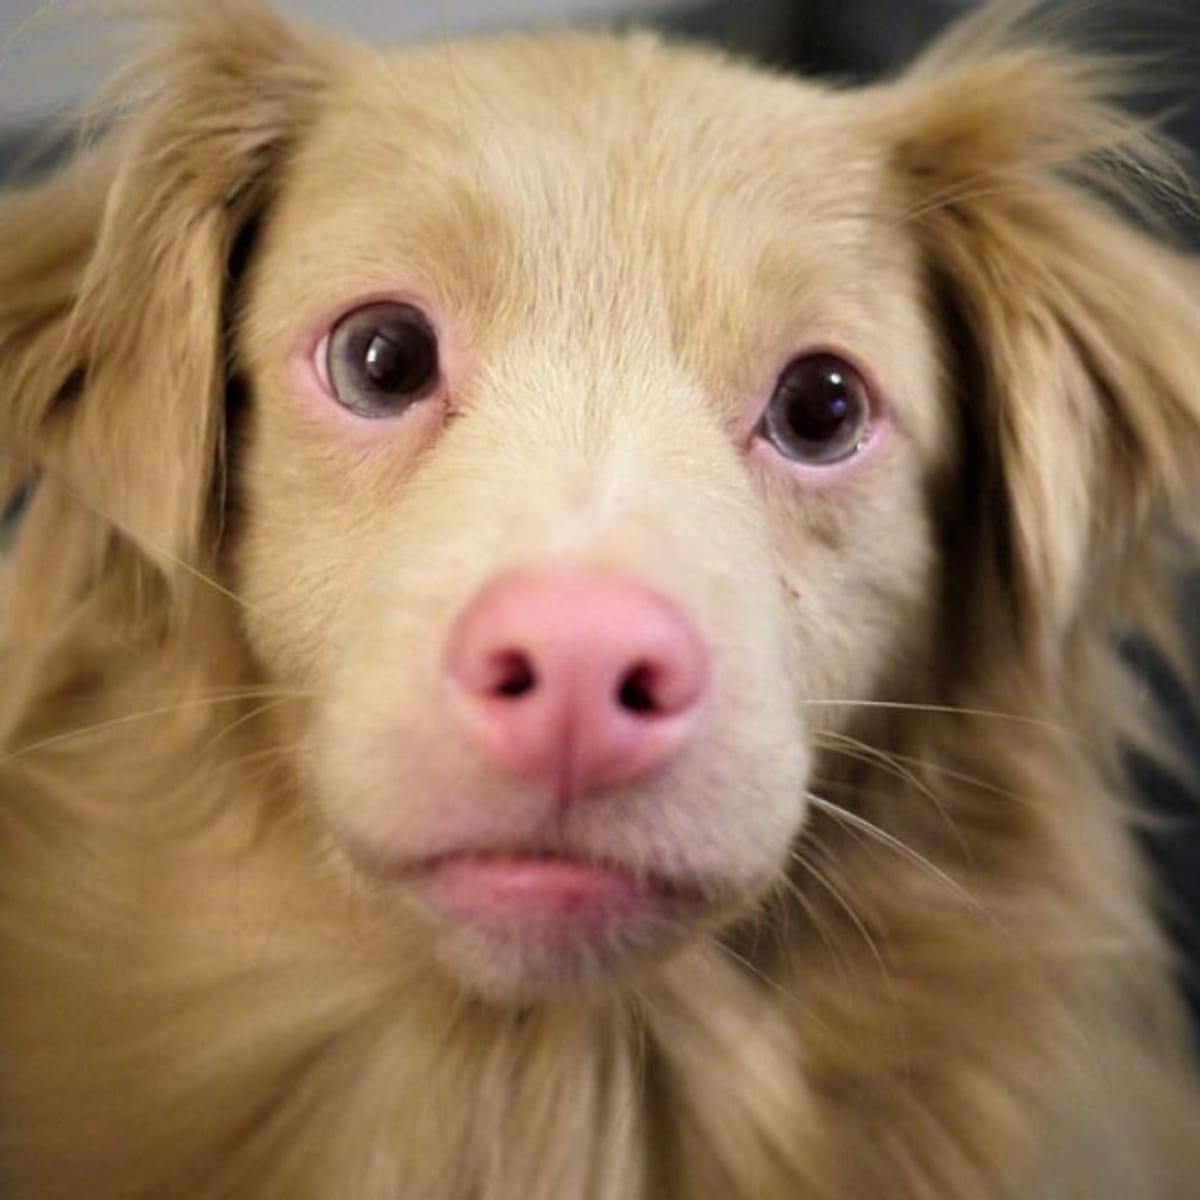 why are some dogs born with pink noses